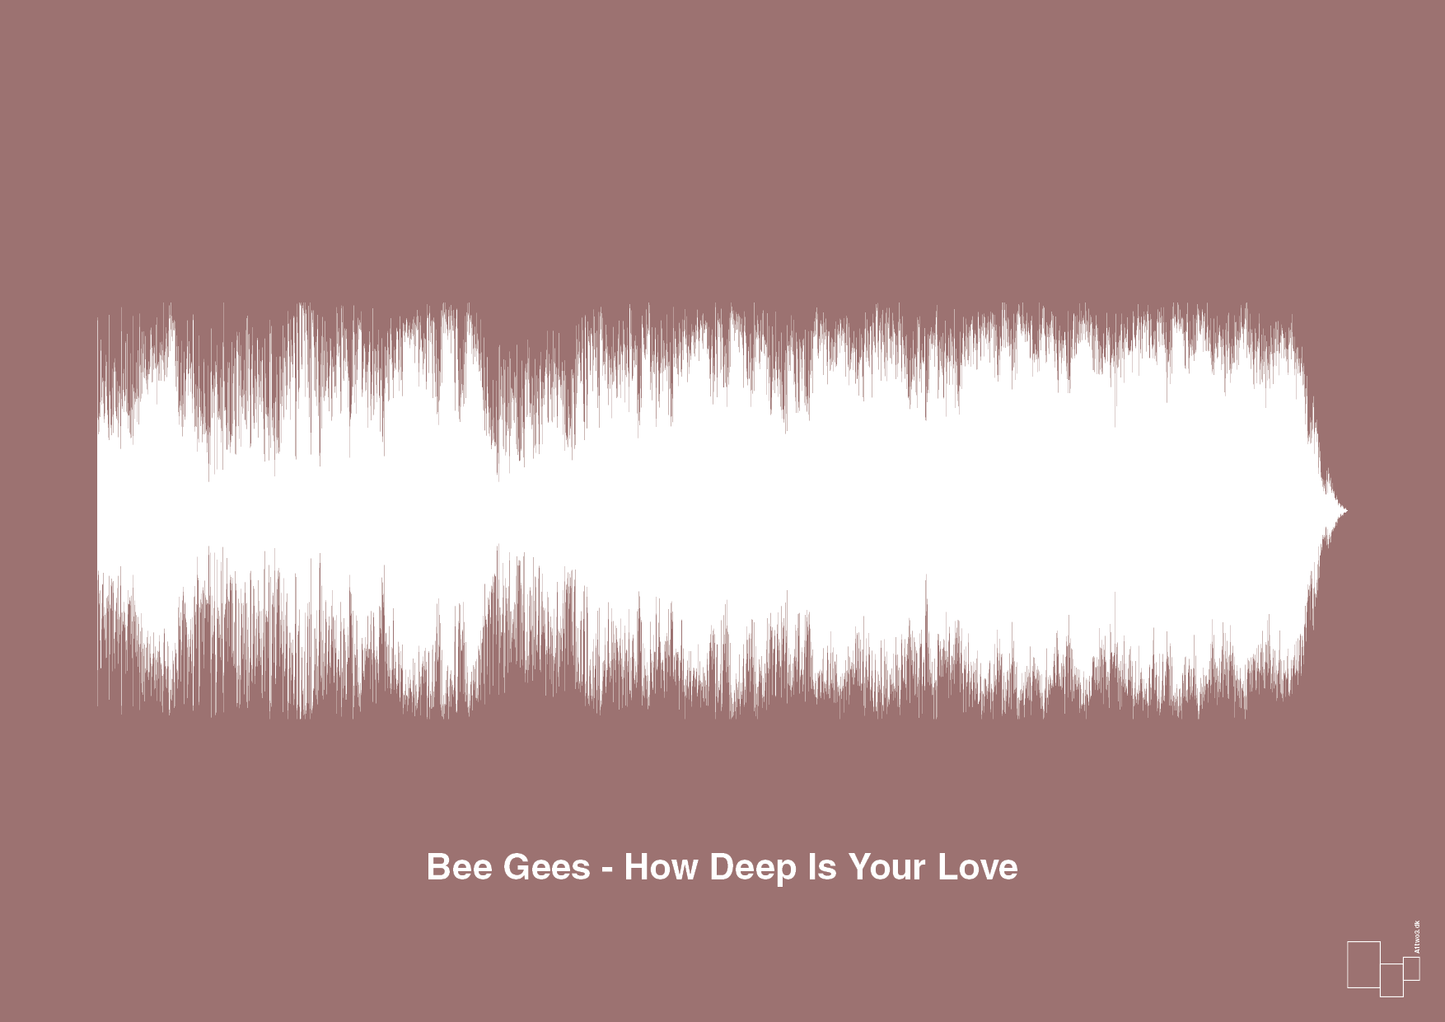 bee gees - how deep is your love - Plakat med Musik i Plum